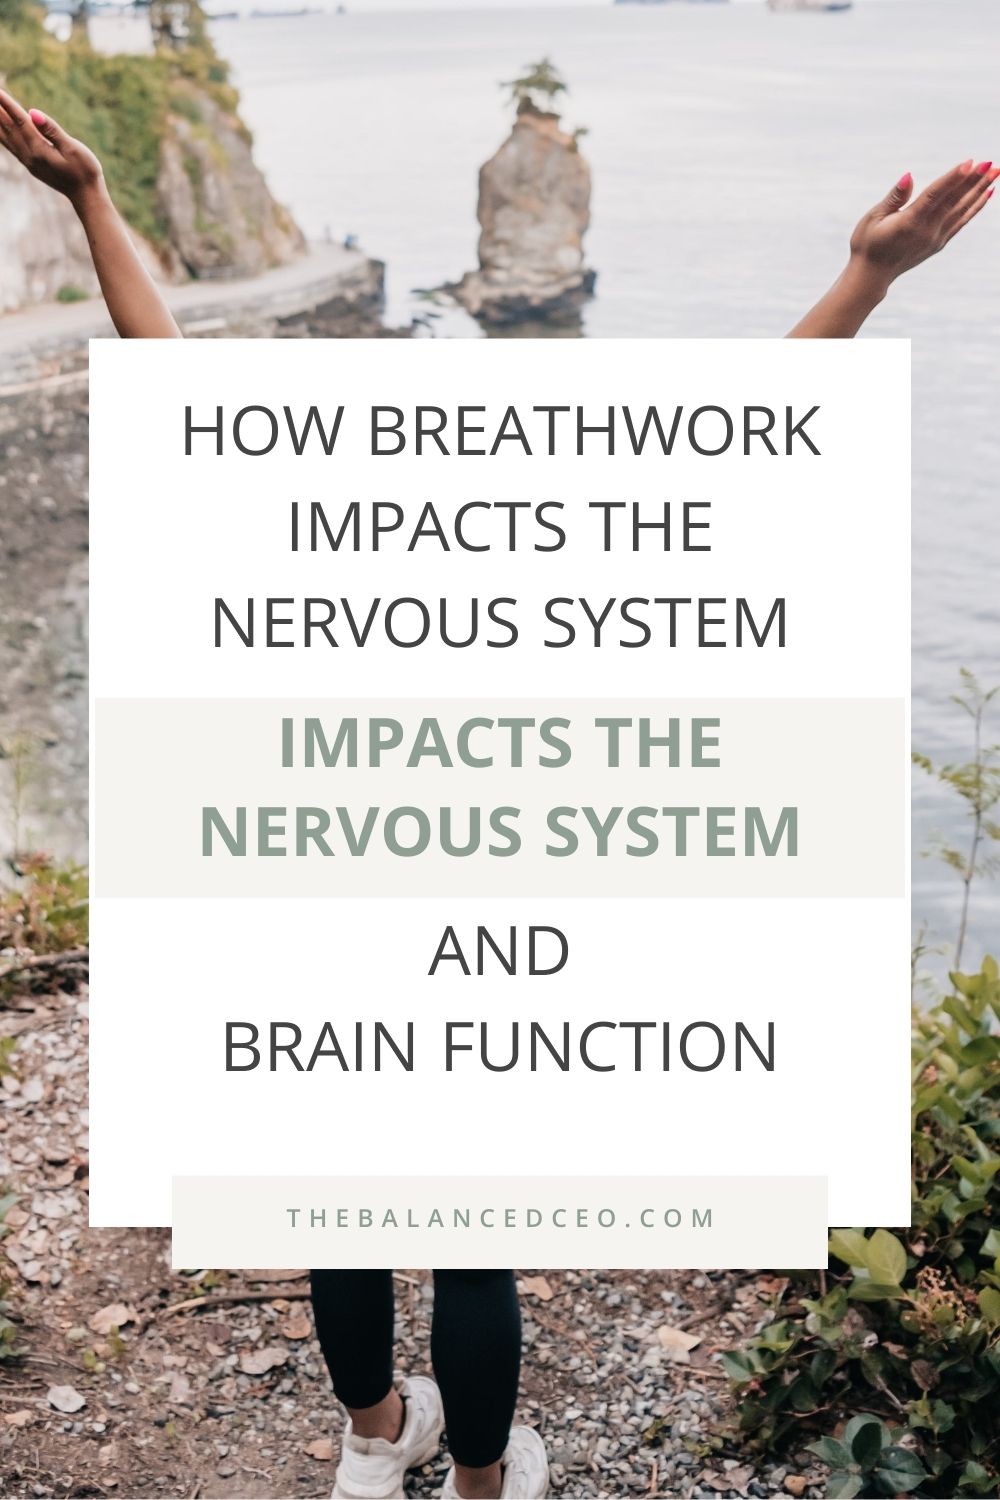 The Scientific Basis of How Breathwork Impacts the Nervous System and Brain Function